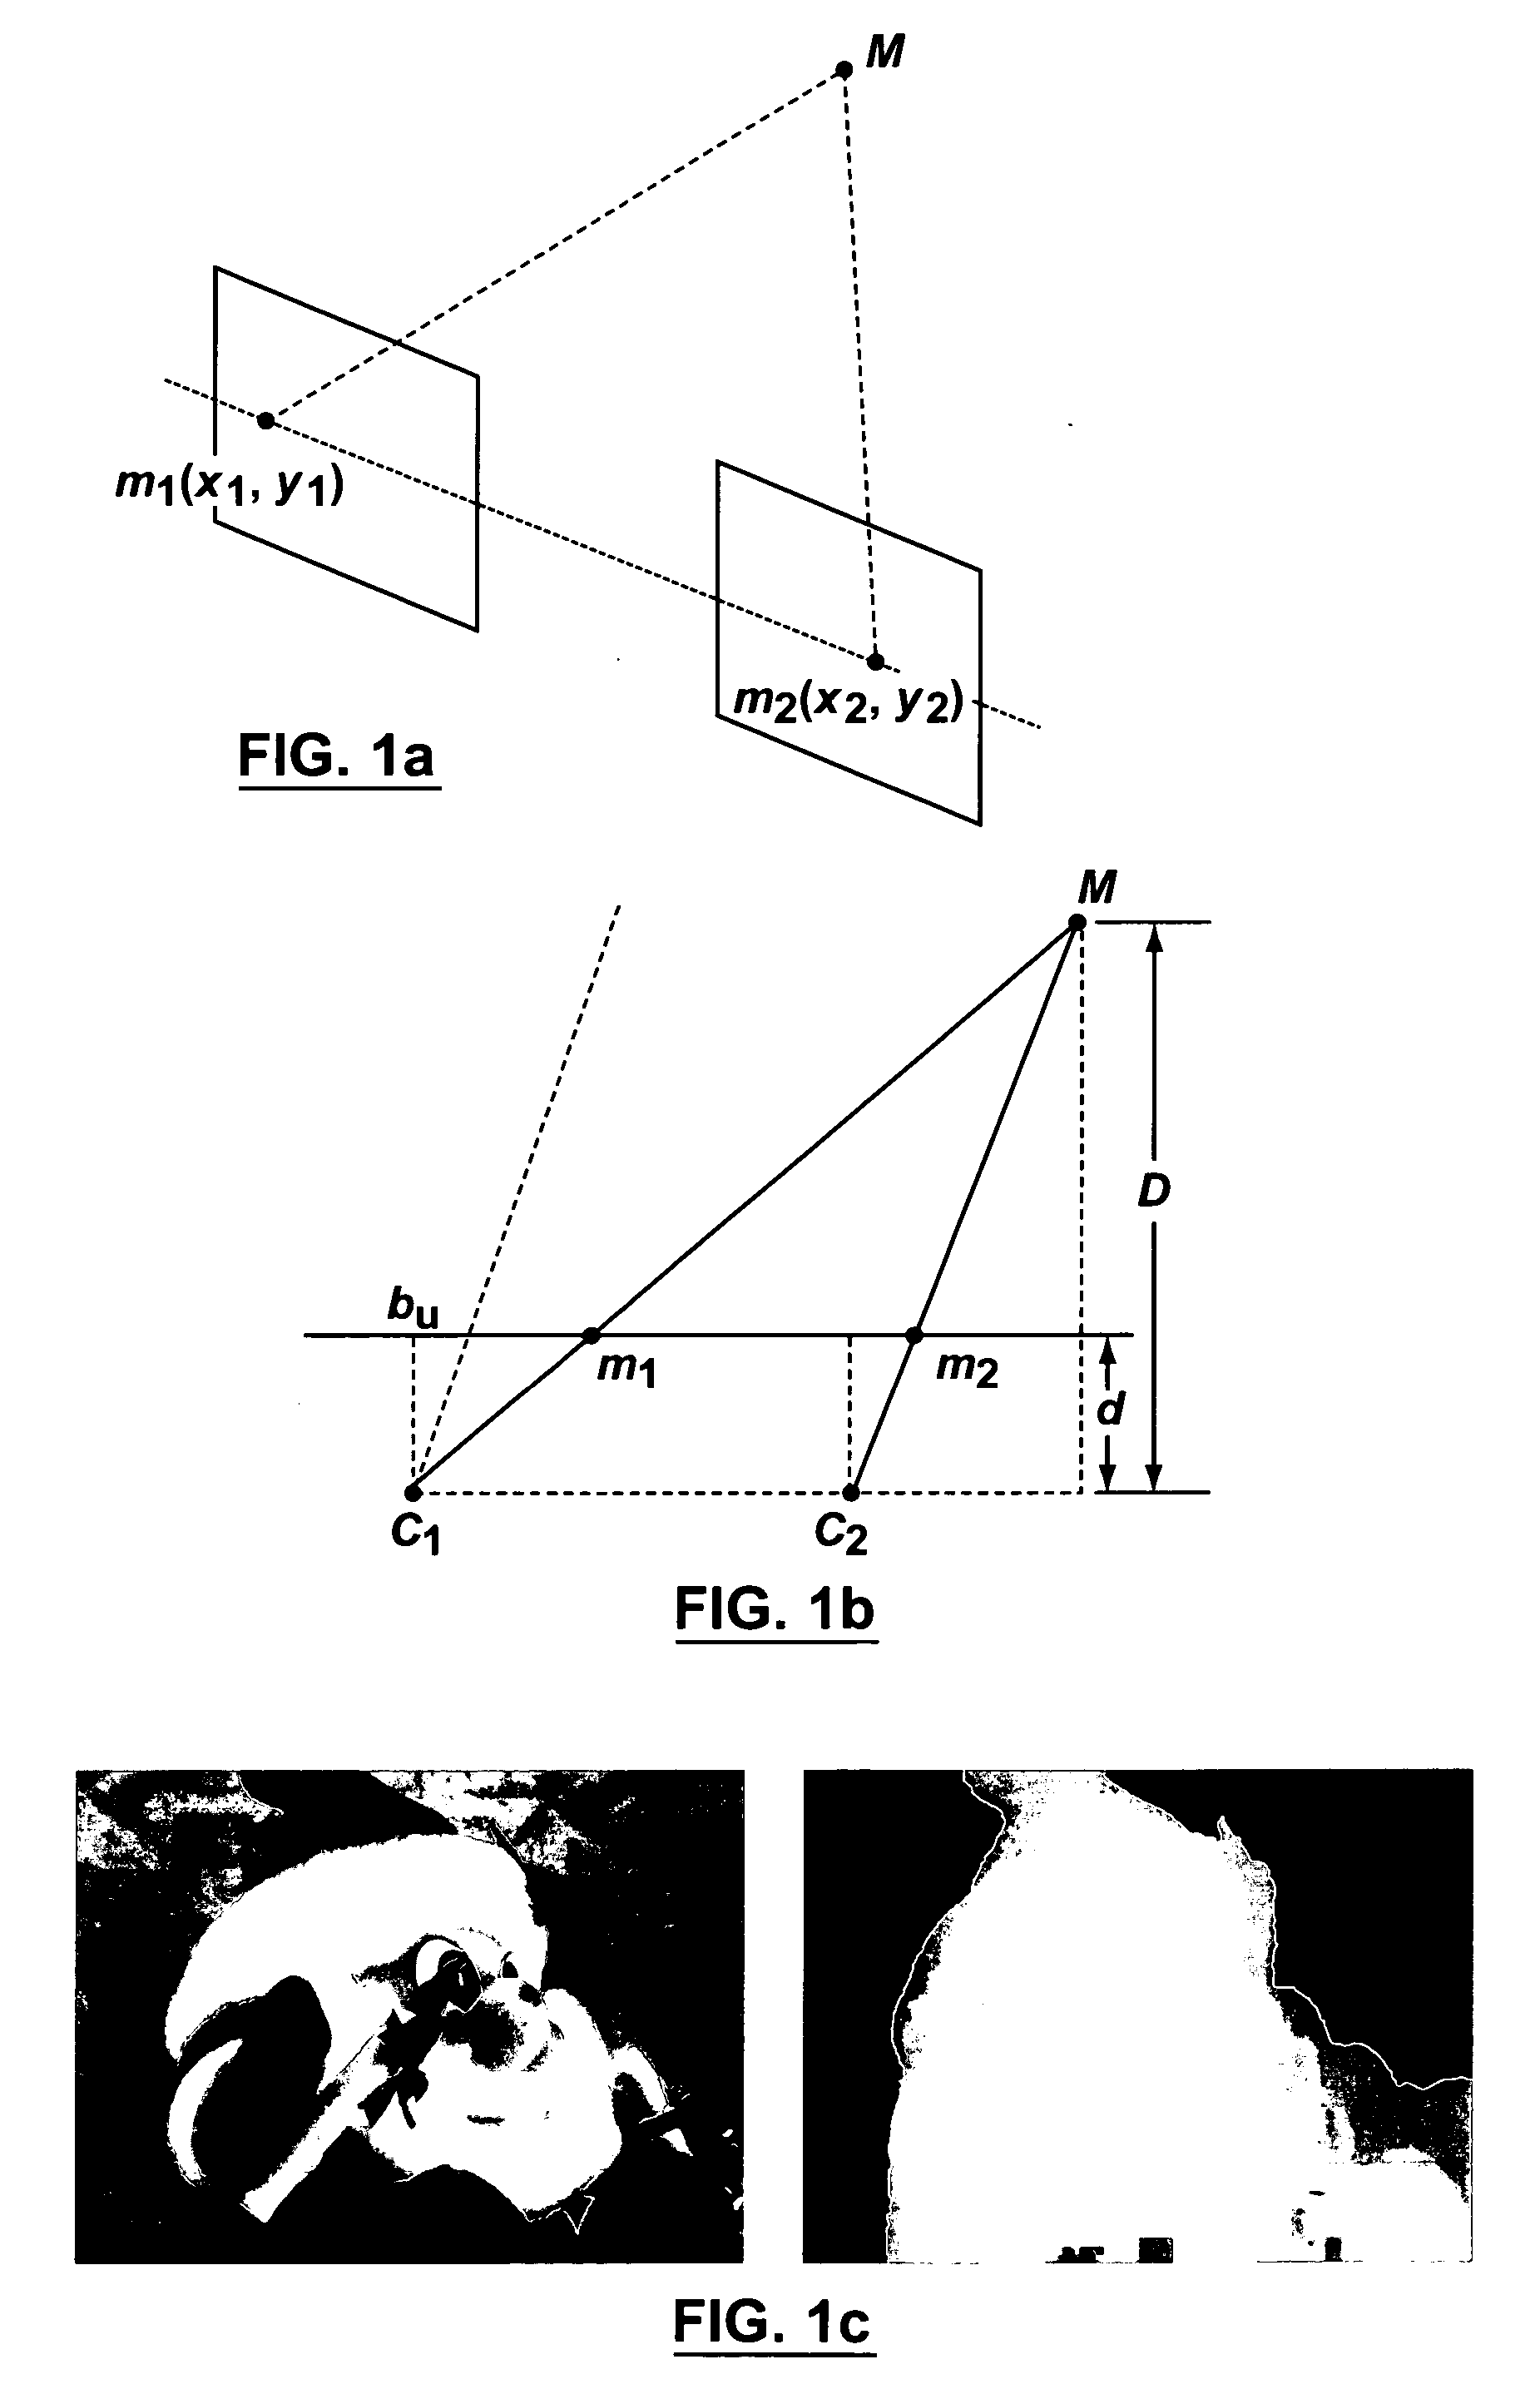 Method and system for real time image rendering